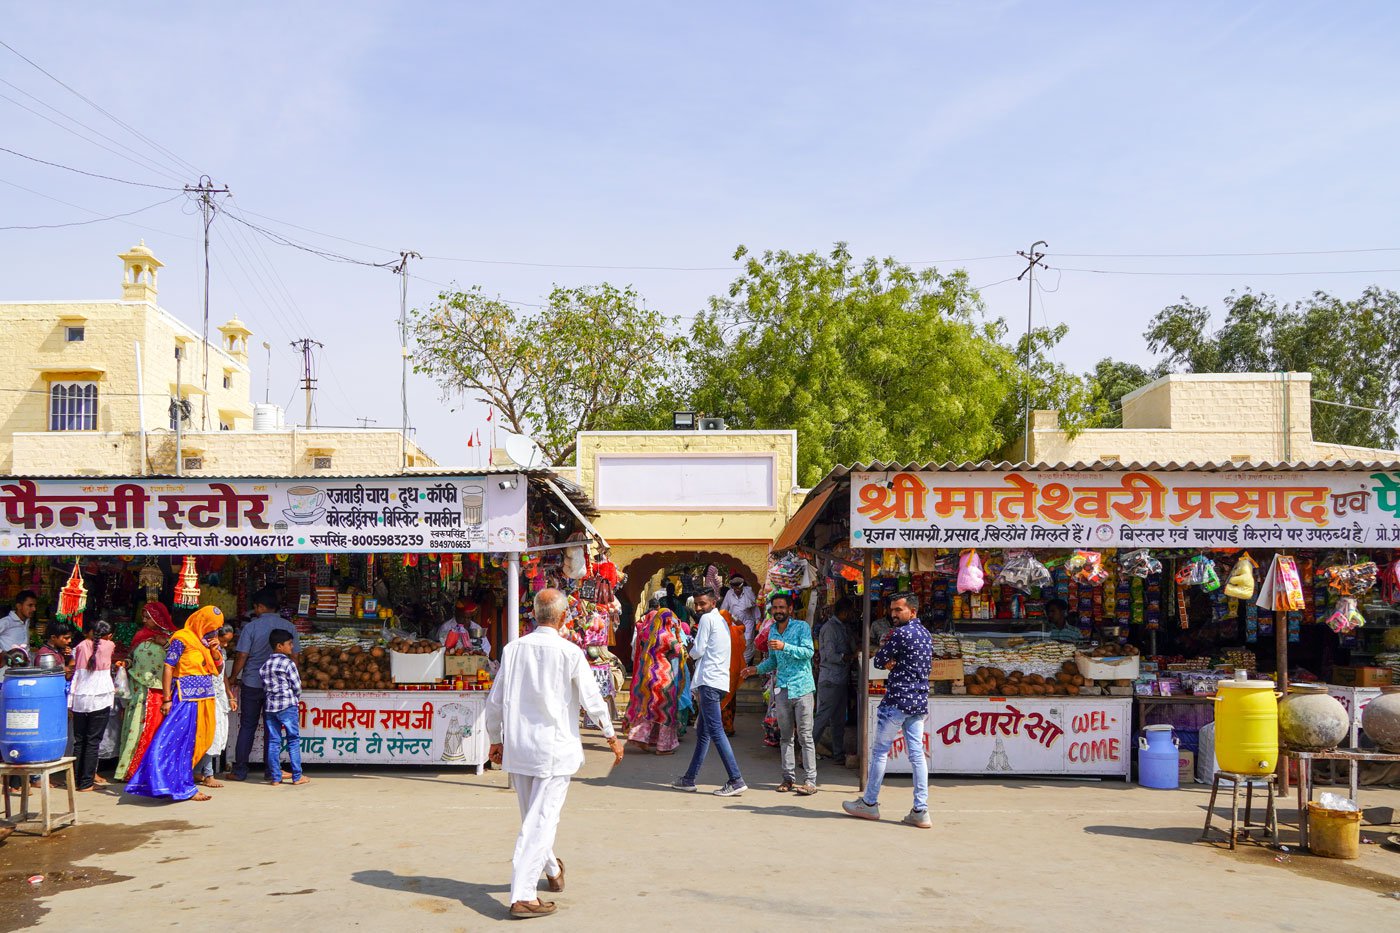 There is small bustling market outside the temple selling items for pujas, toys and snacks